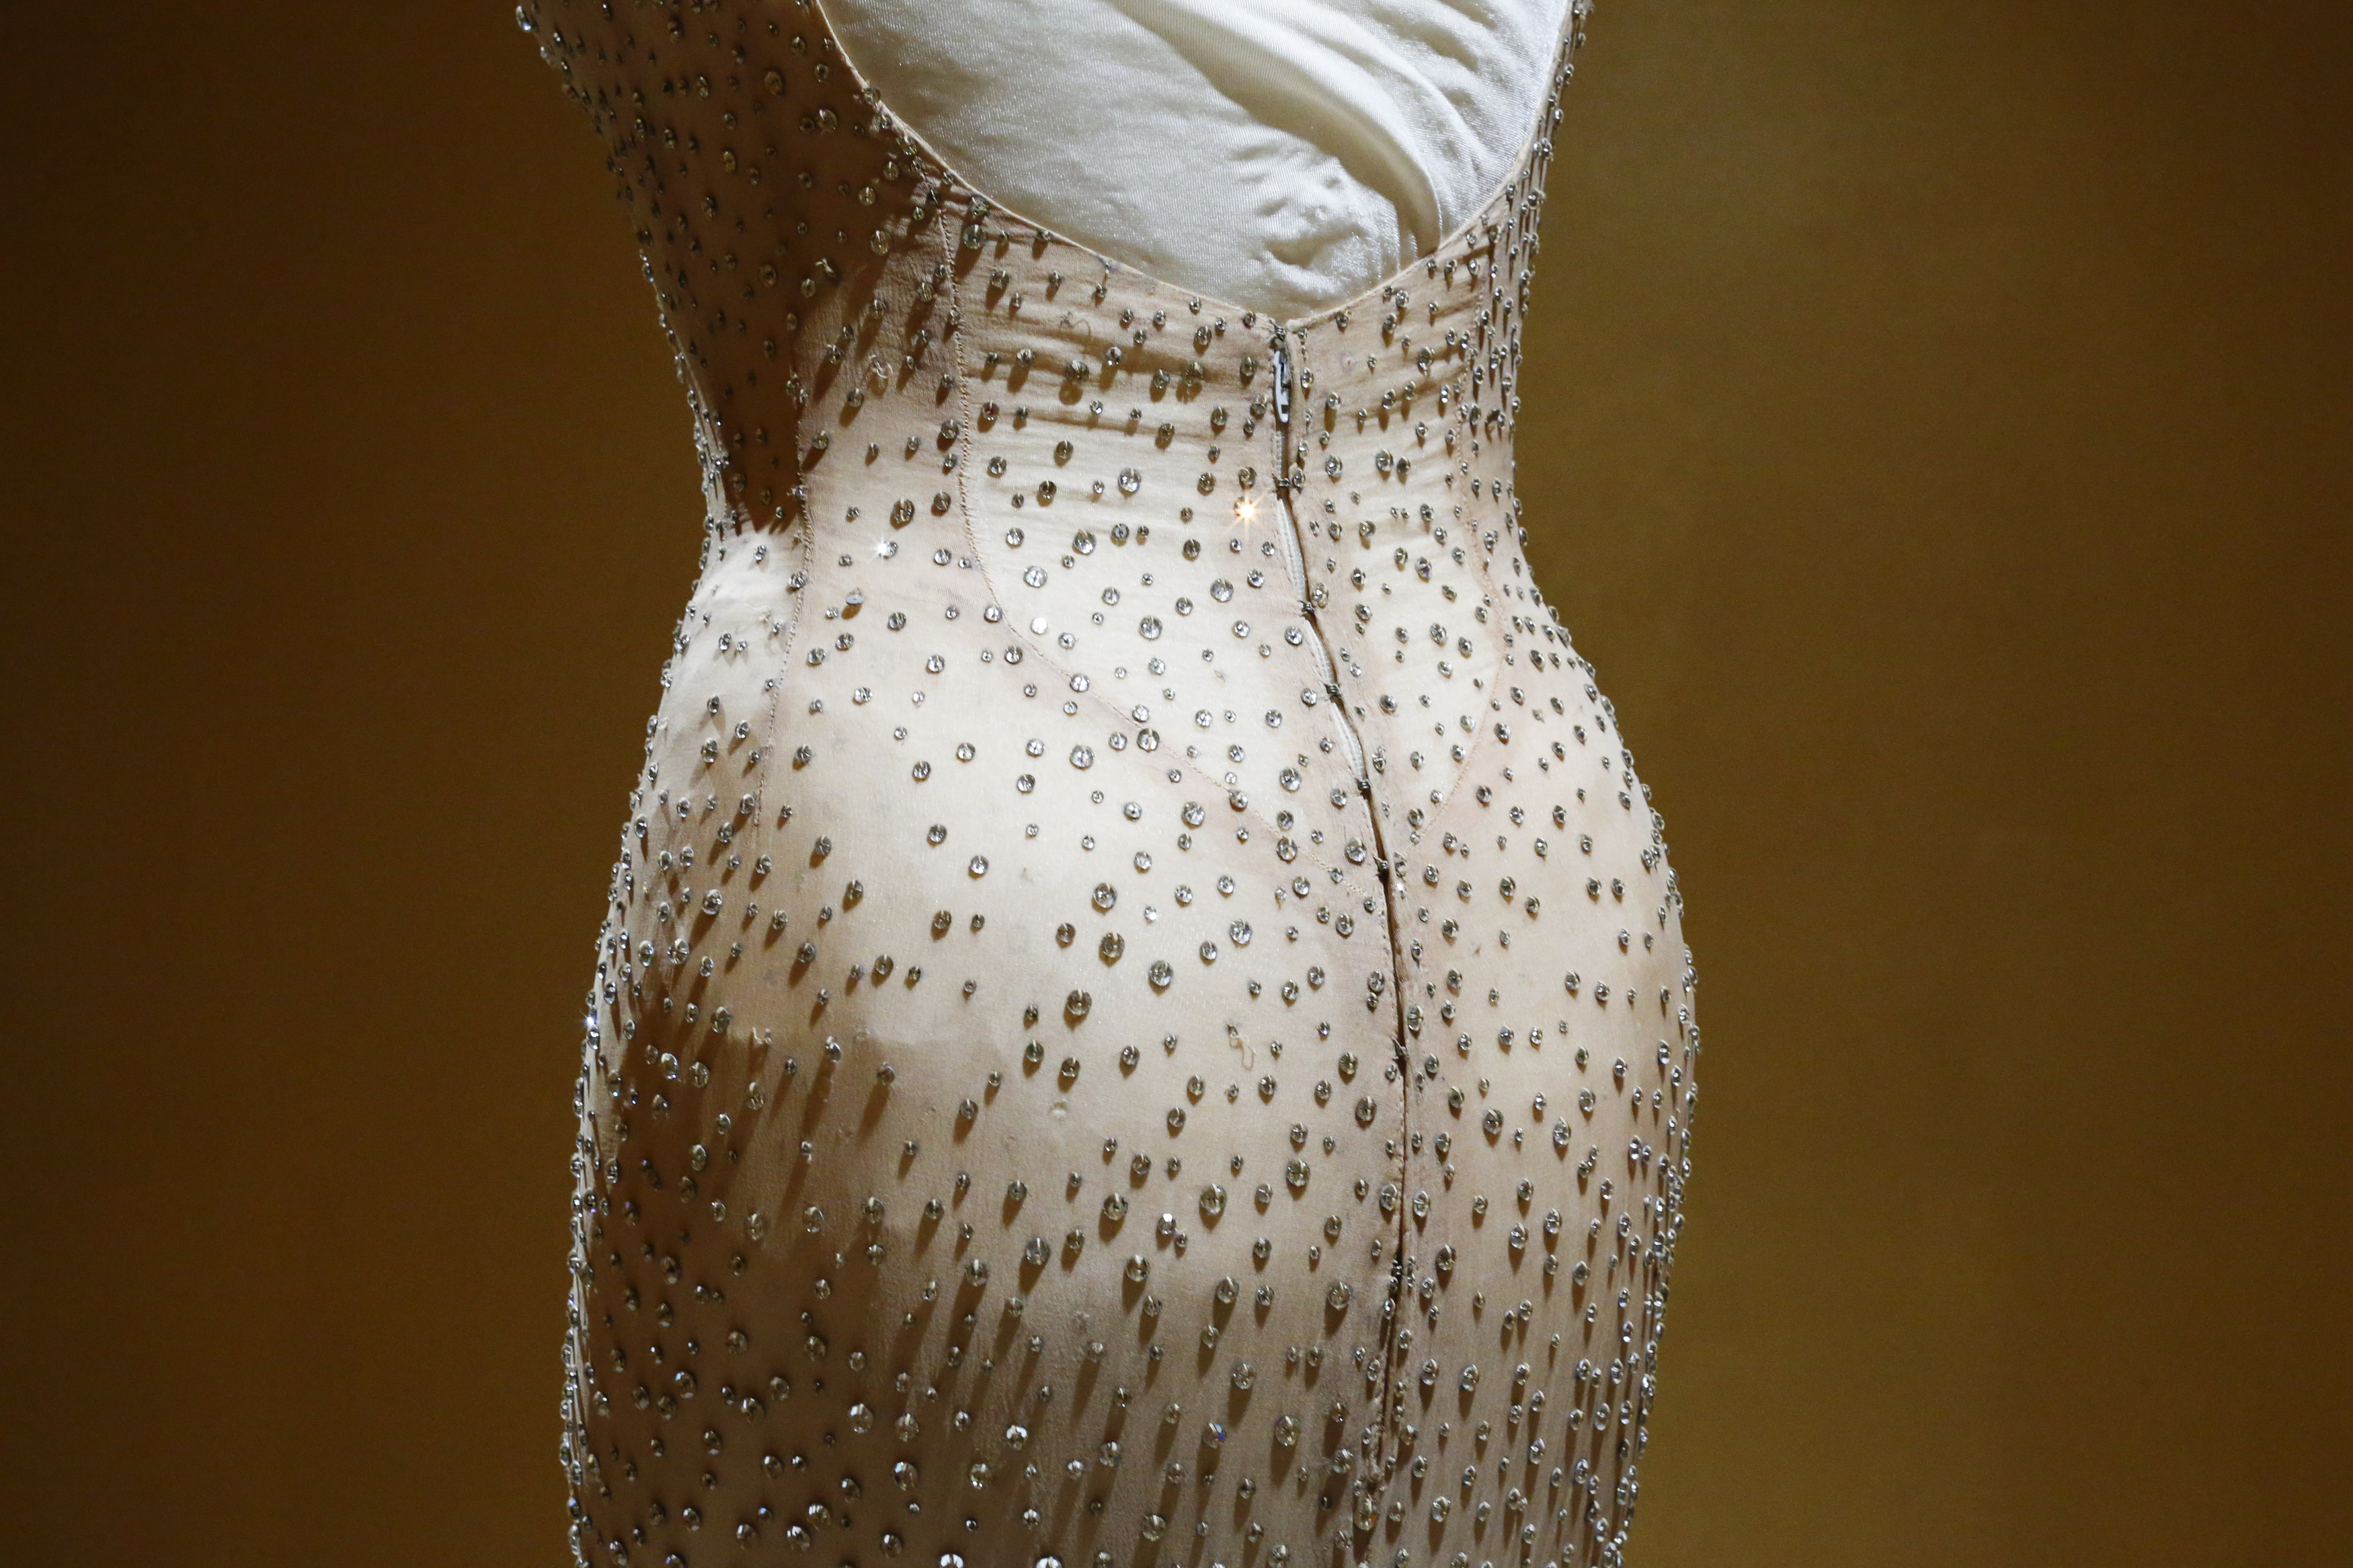 The back of Marilyn Monroe's 'Hpapy Birthday' dress is photographed ahead of an aucition in 2016